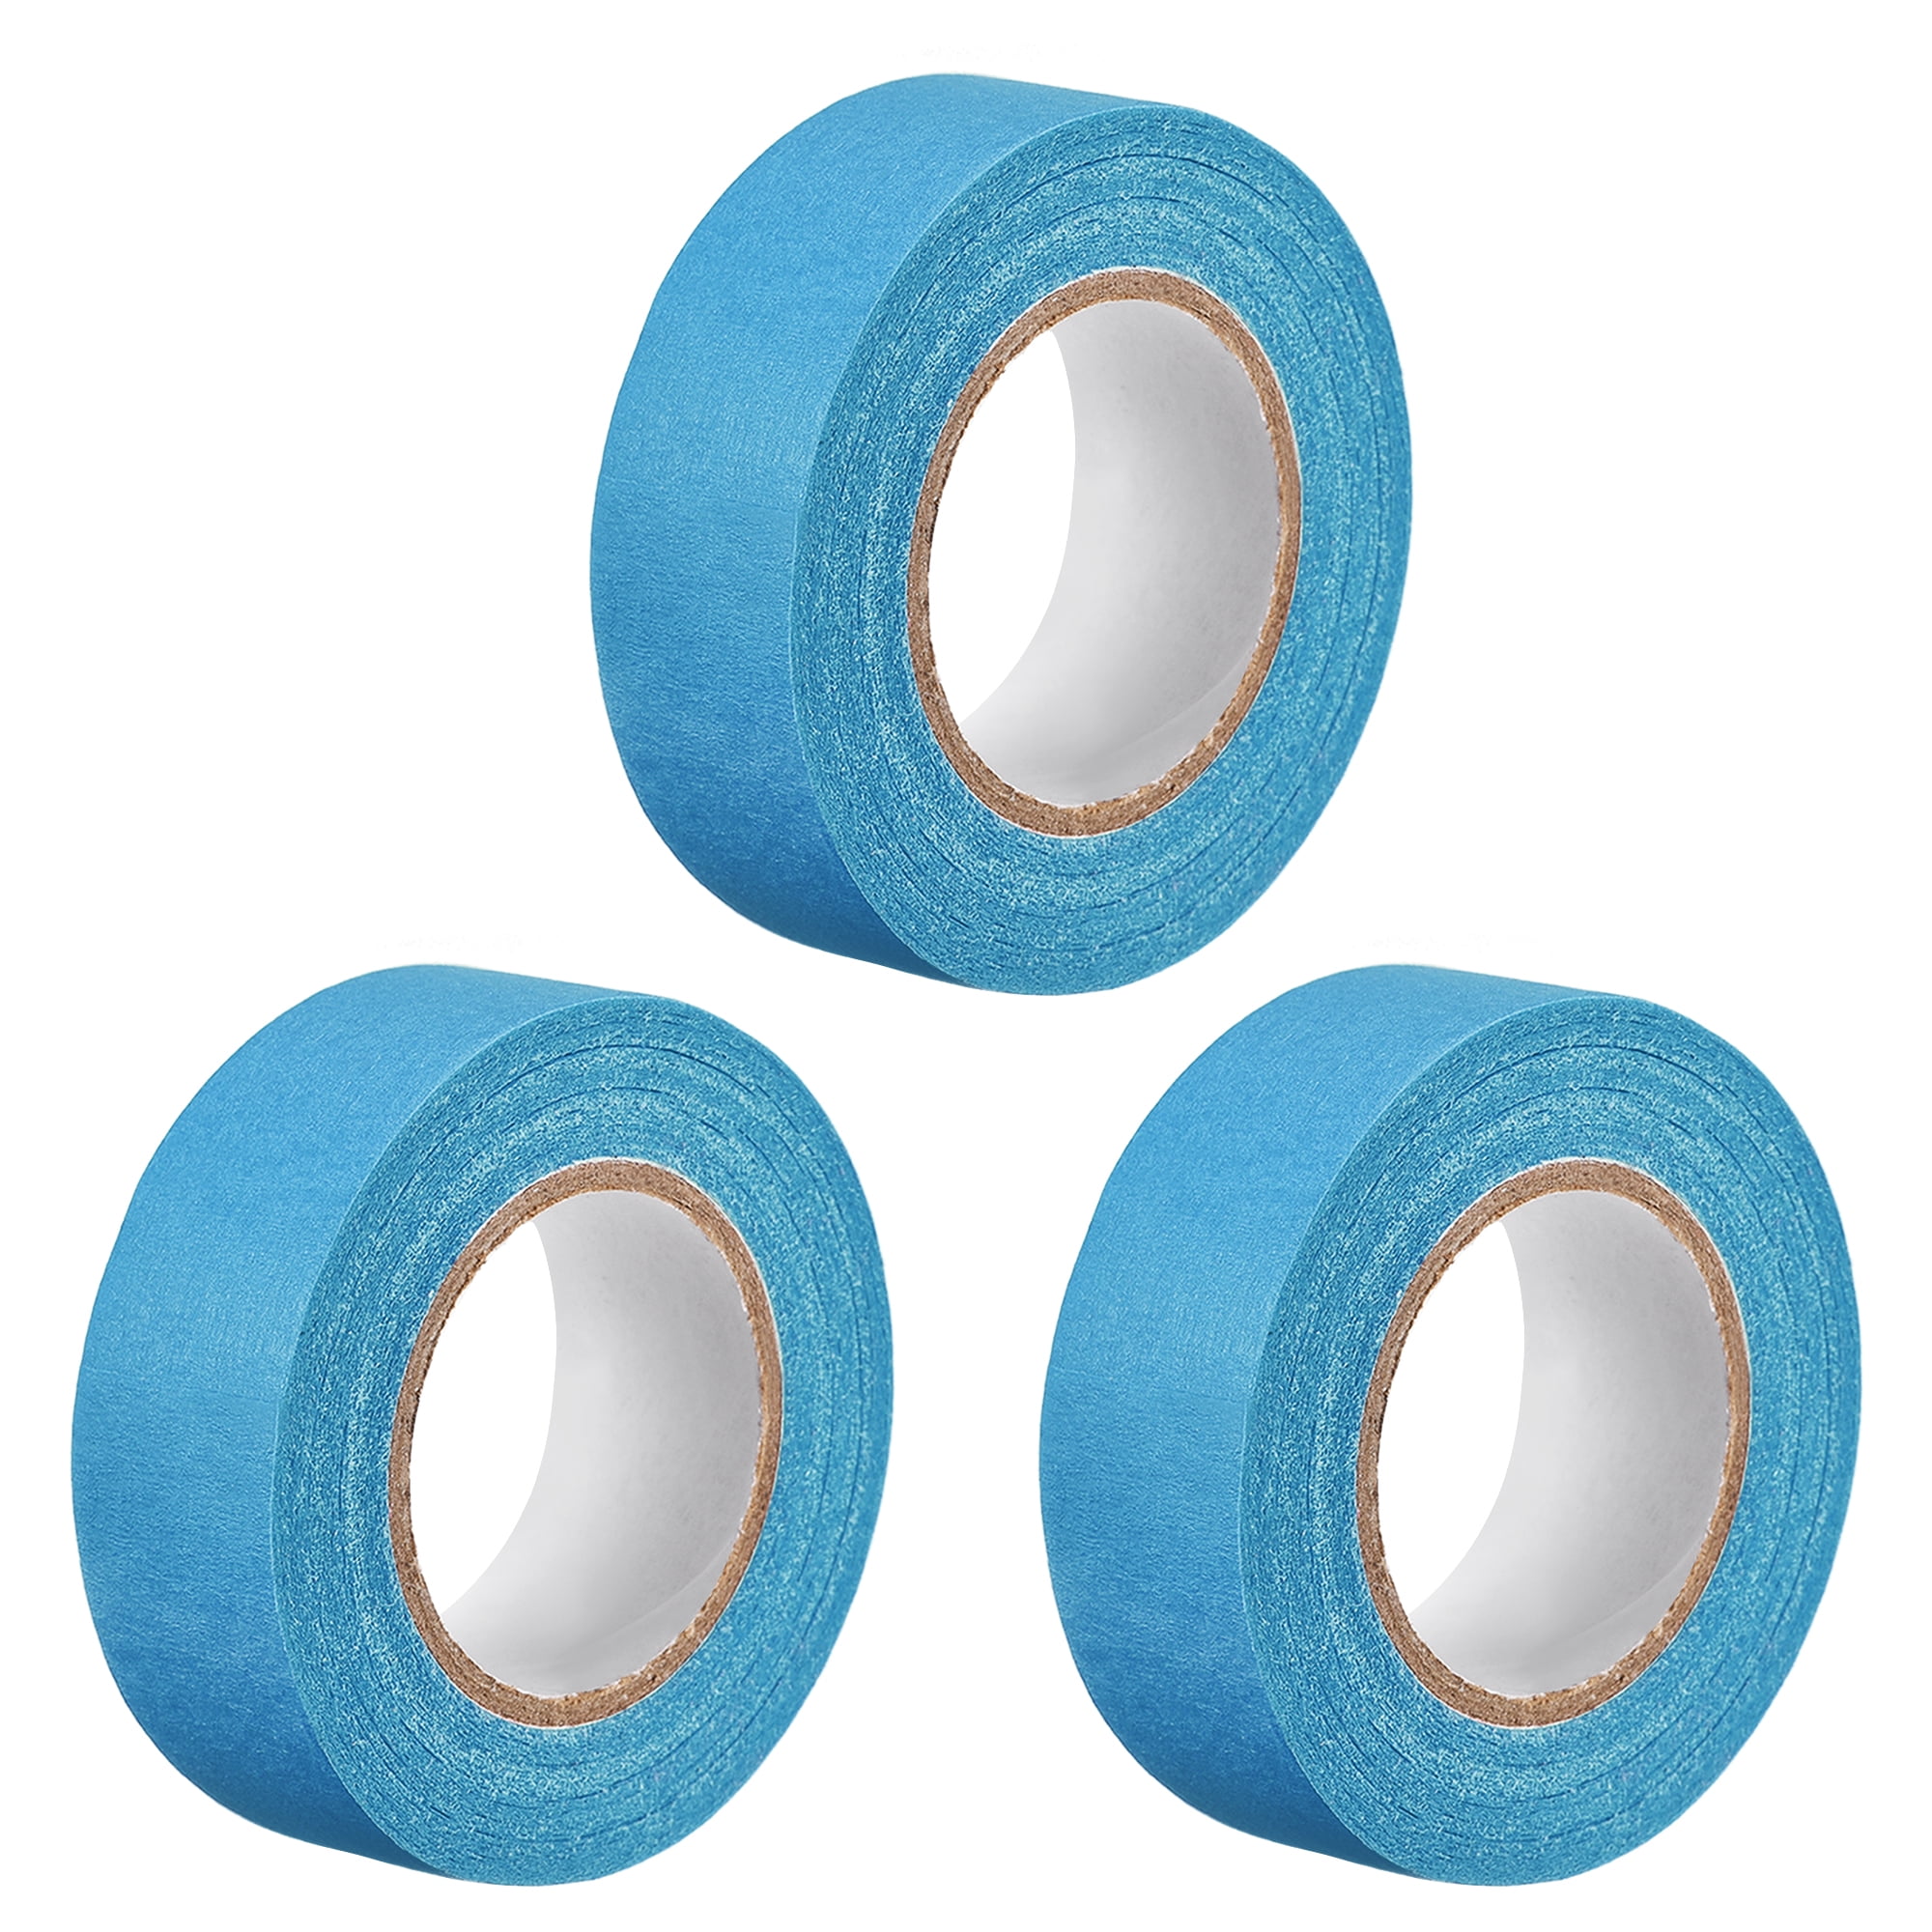 Uxcell 3Pcs 20mm 0.8 inch Wide 20m 21 Yards Masking Tape Painters Tape  Rolls Light Blue 